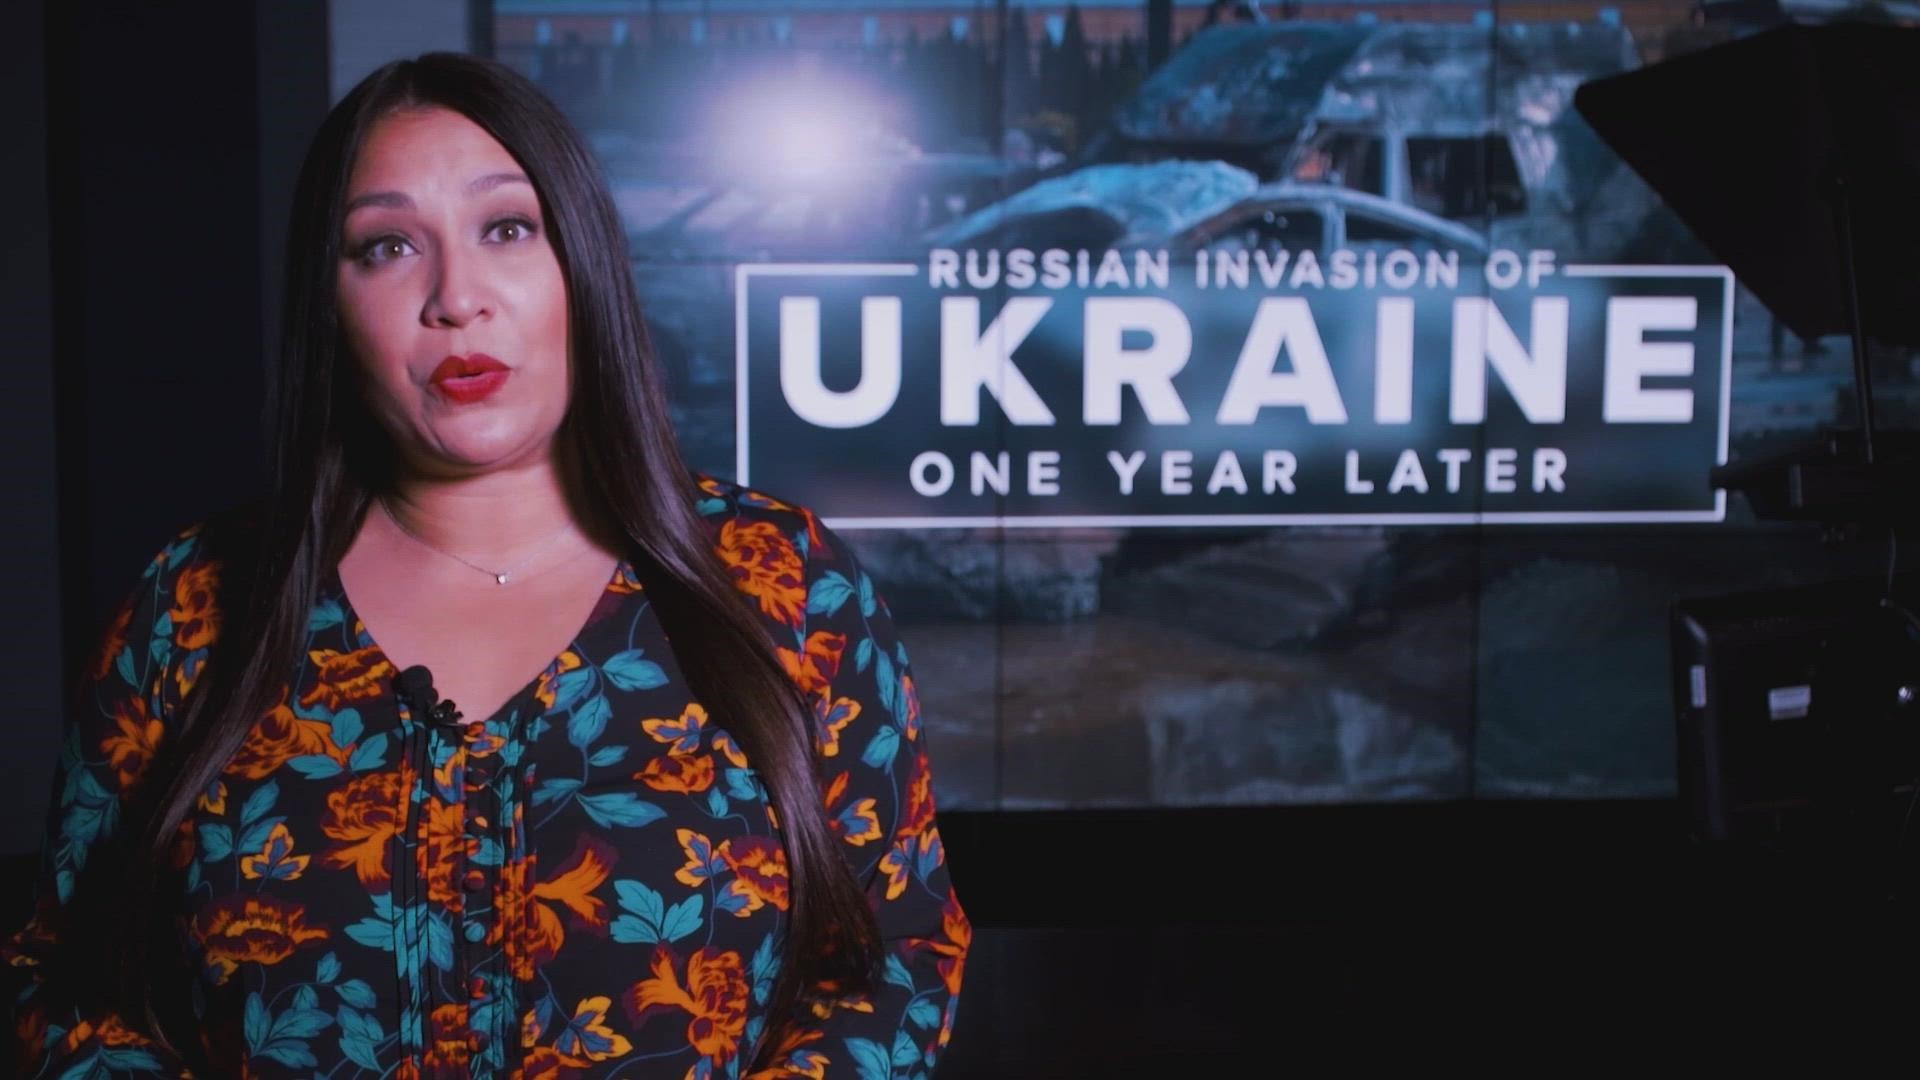 Friday marks one year since the start of the Russian invasion of Ukraine.